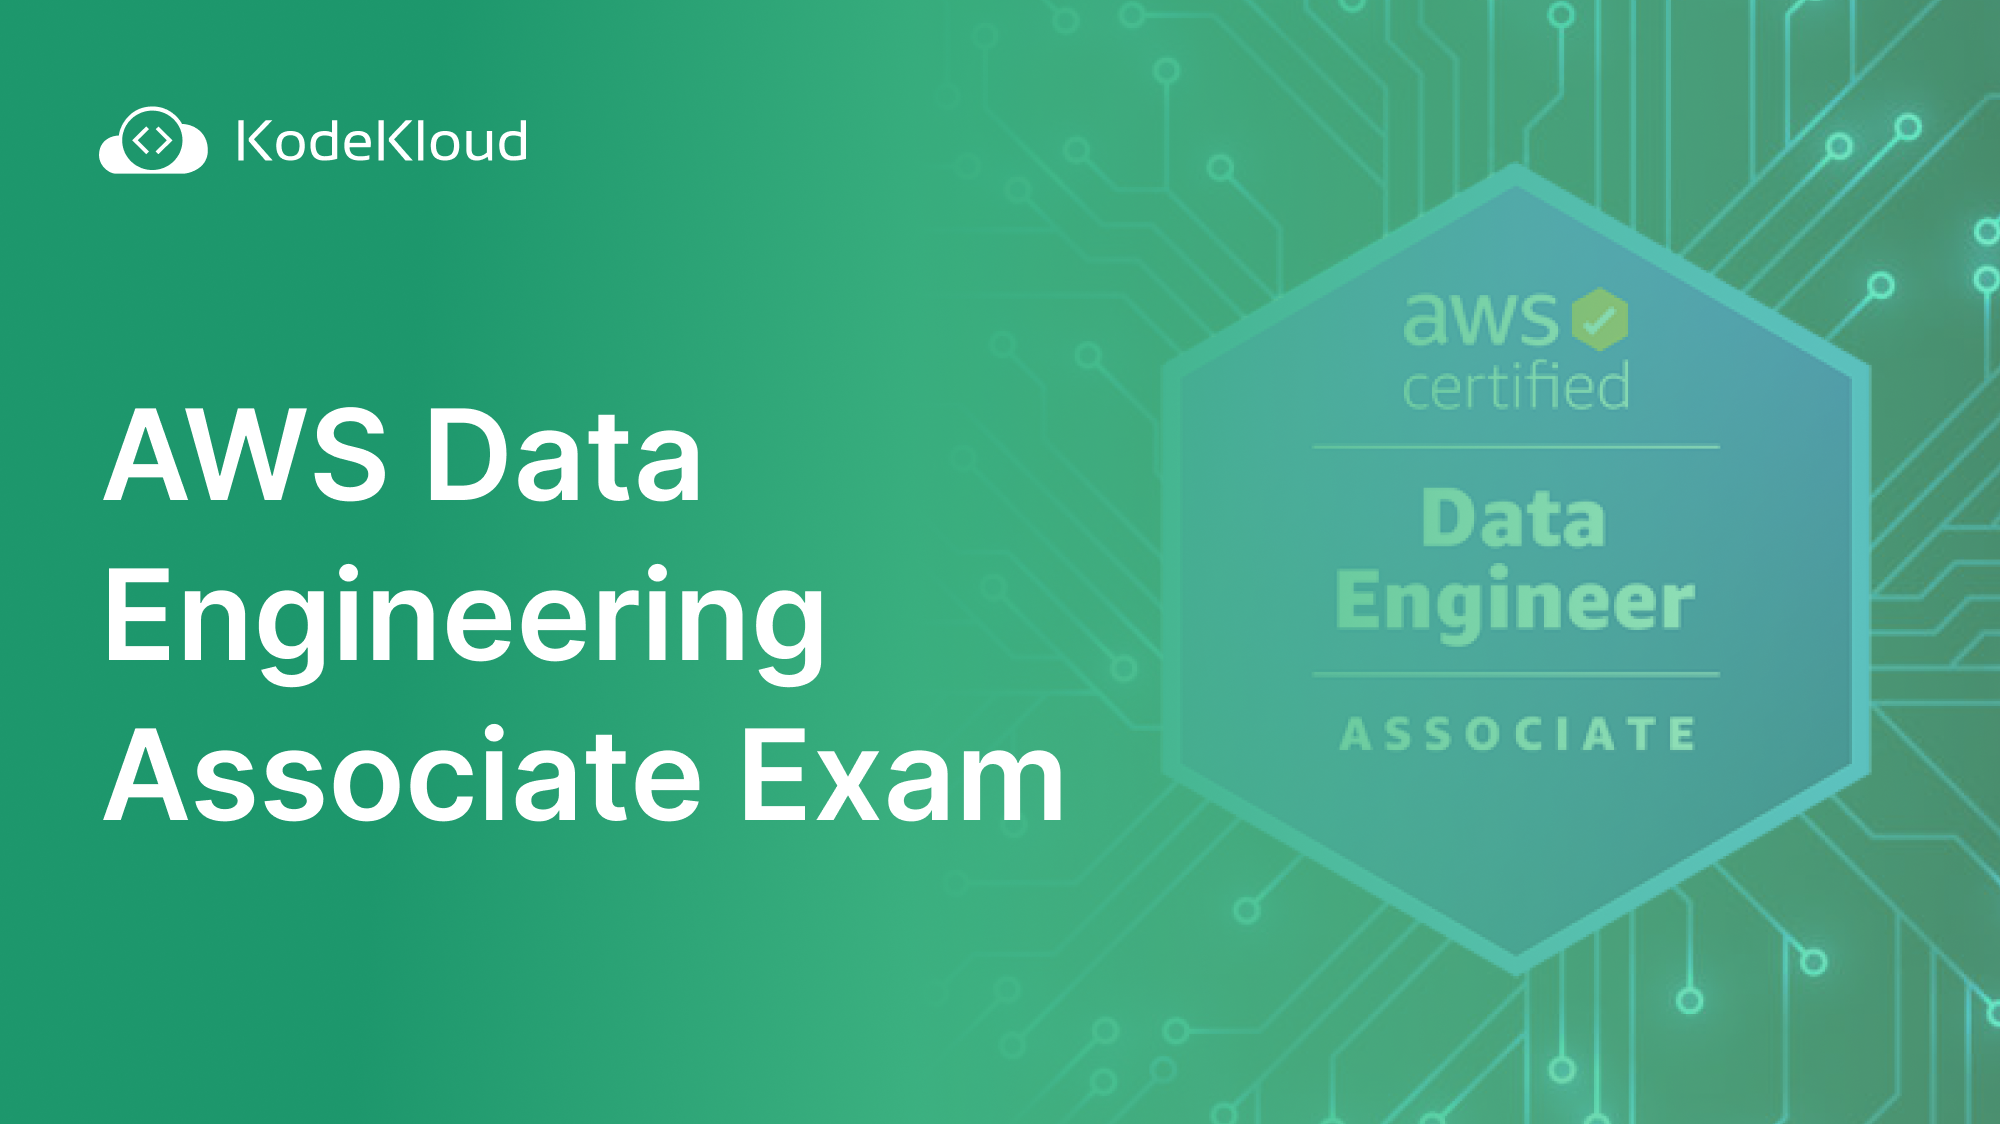 AWS Data Engineering Associate Exam - What to Expect